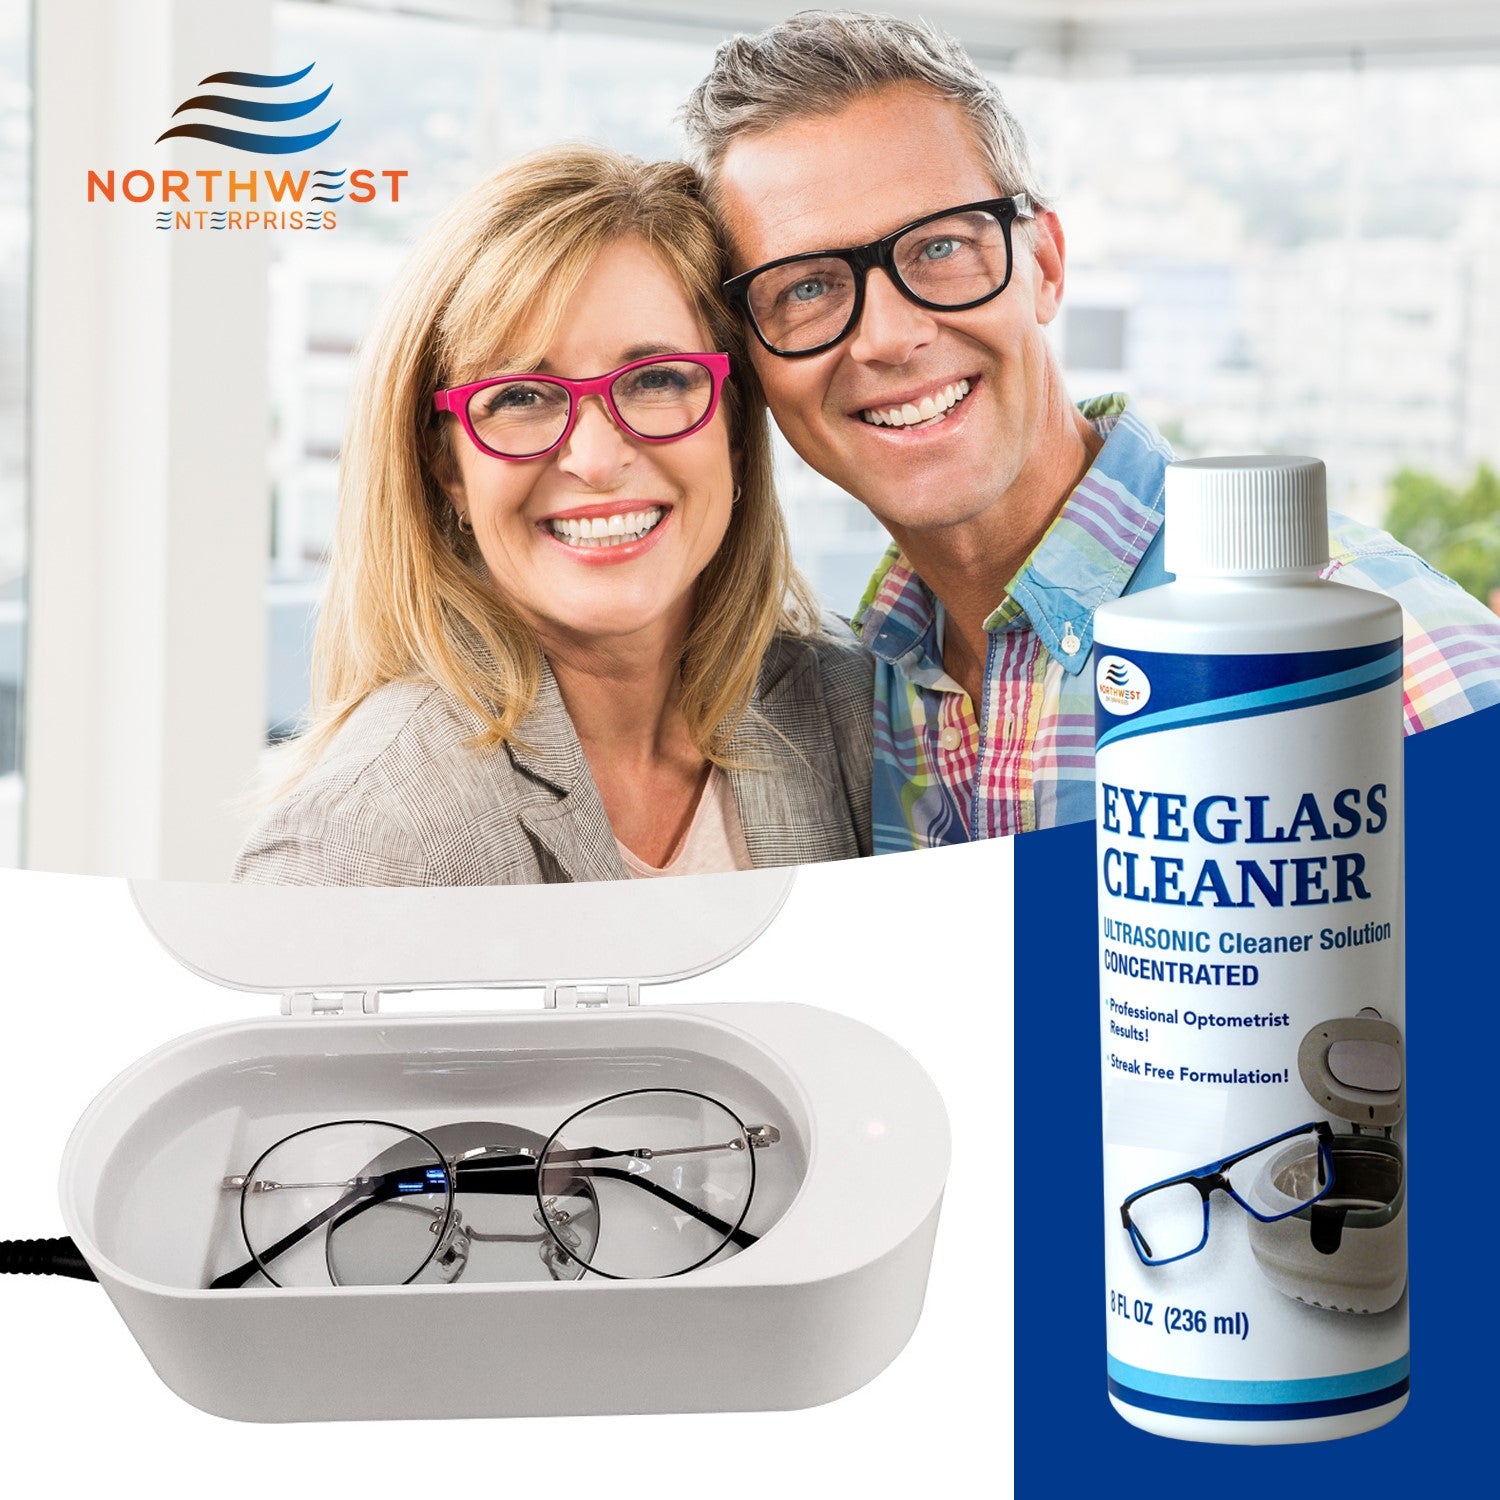 Ultrasonic Eyeglass Cleaner: Ultrasonic Cleaner Solution Concentrate Engineered Specifically as an Ultrasonic Glasses Cleaner  for use in Sonic and Ultrasonic Machines.